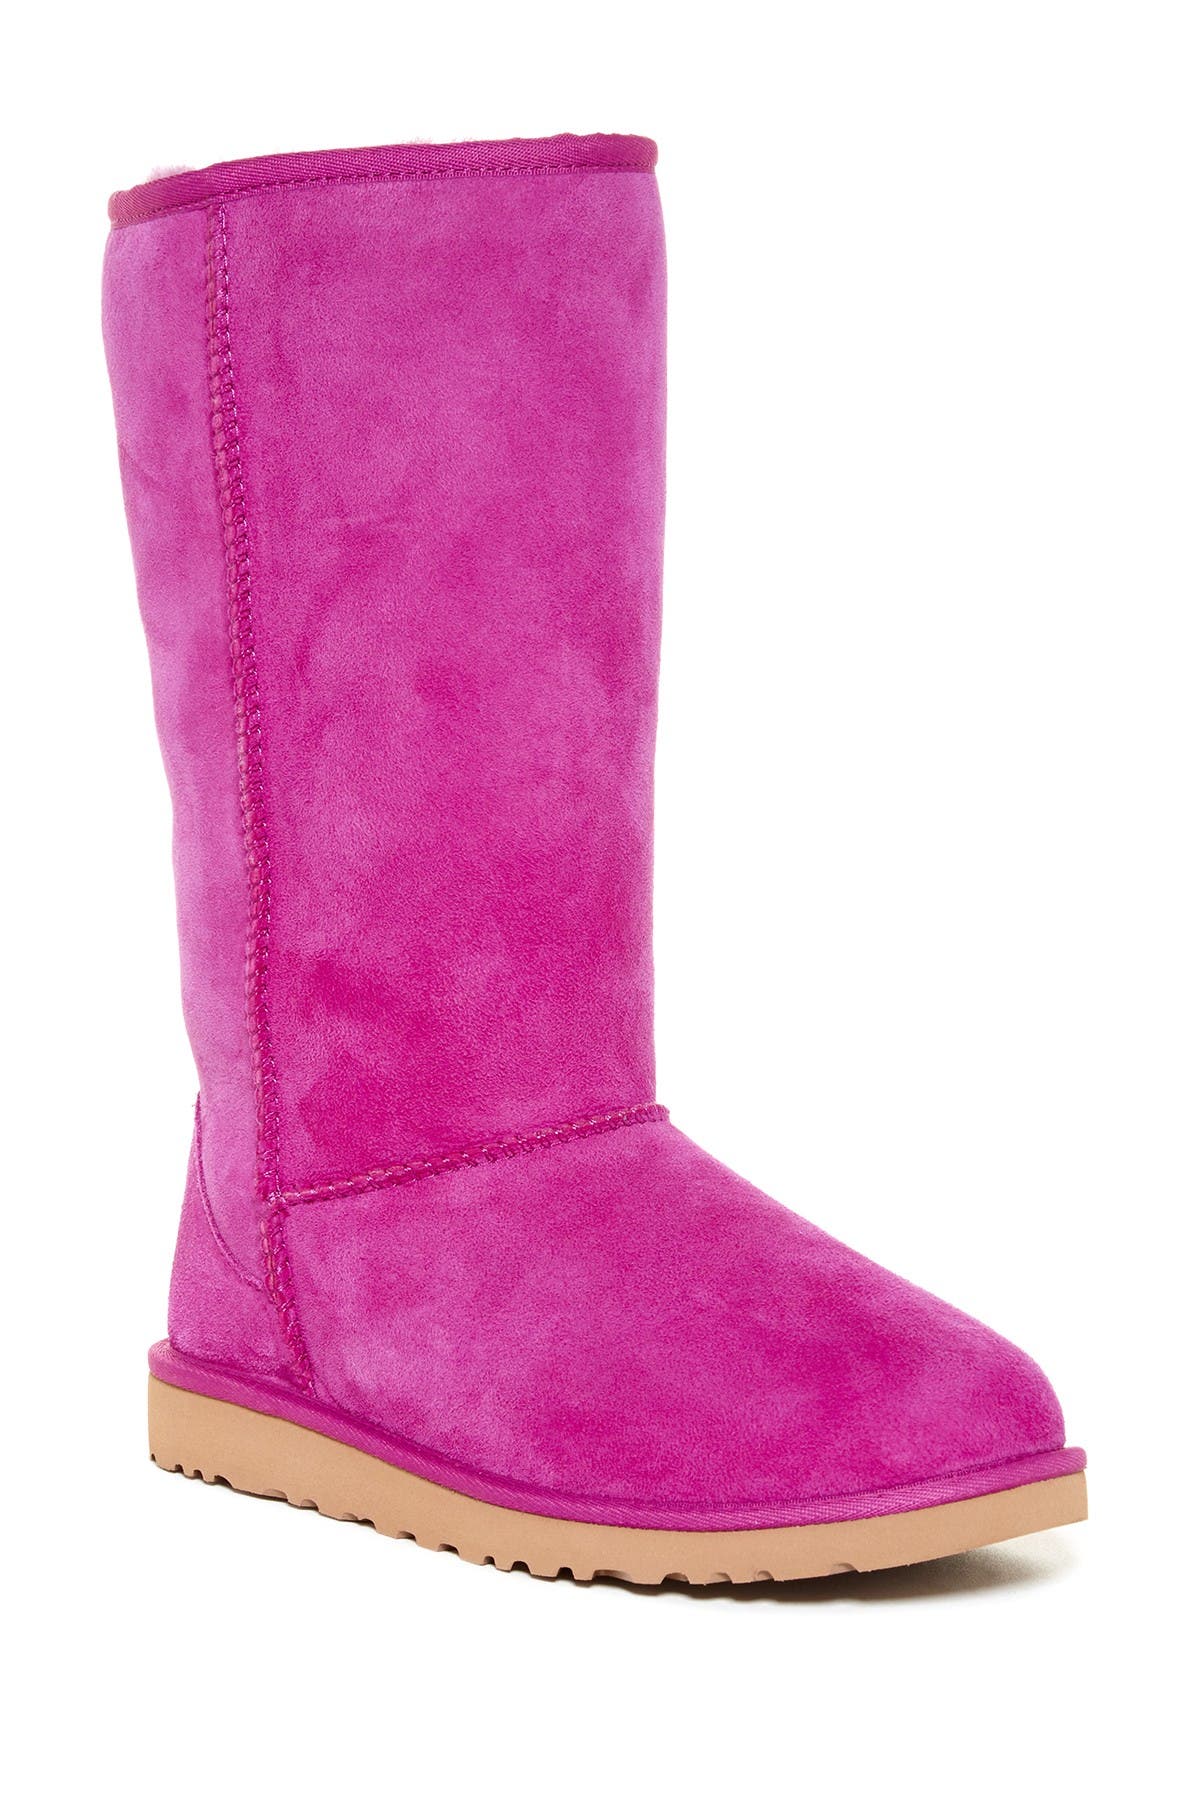 pink tall uggs